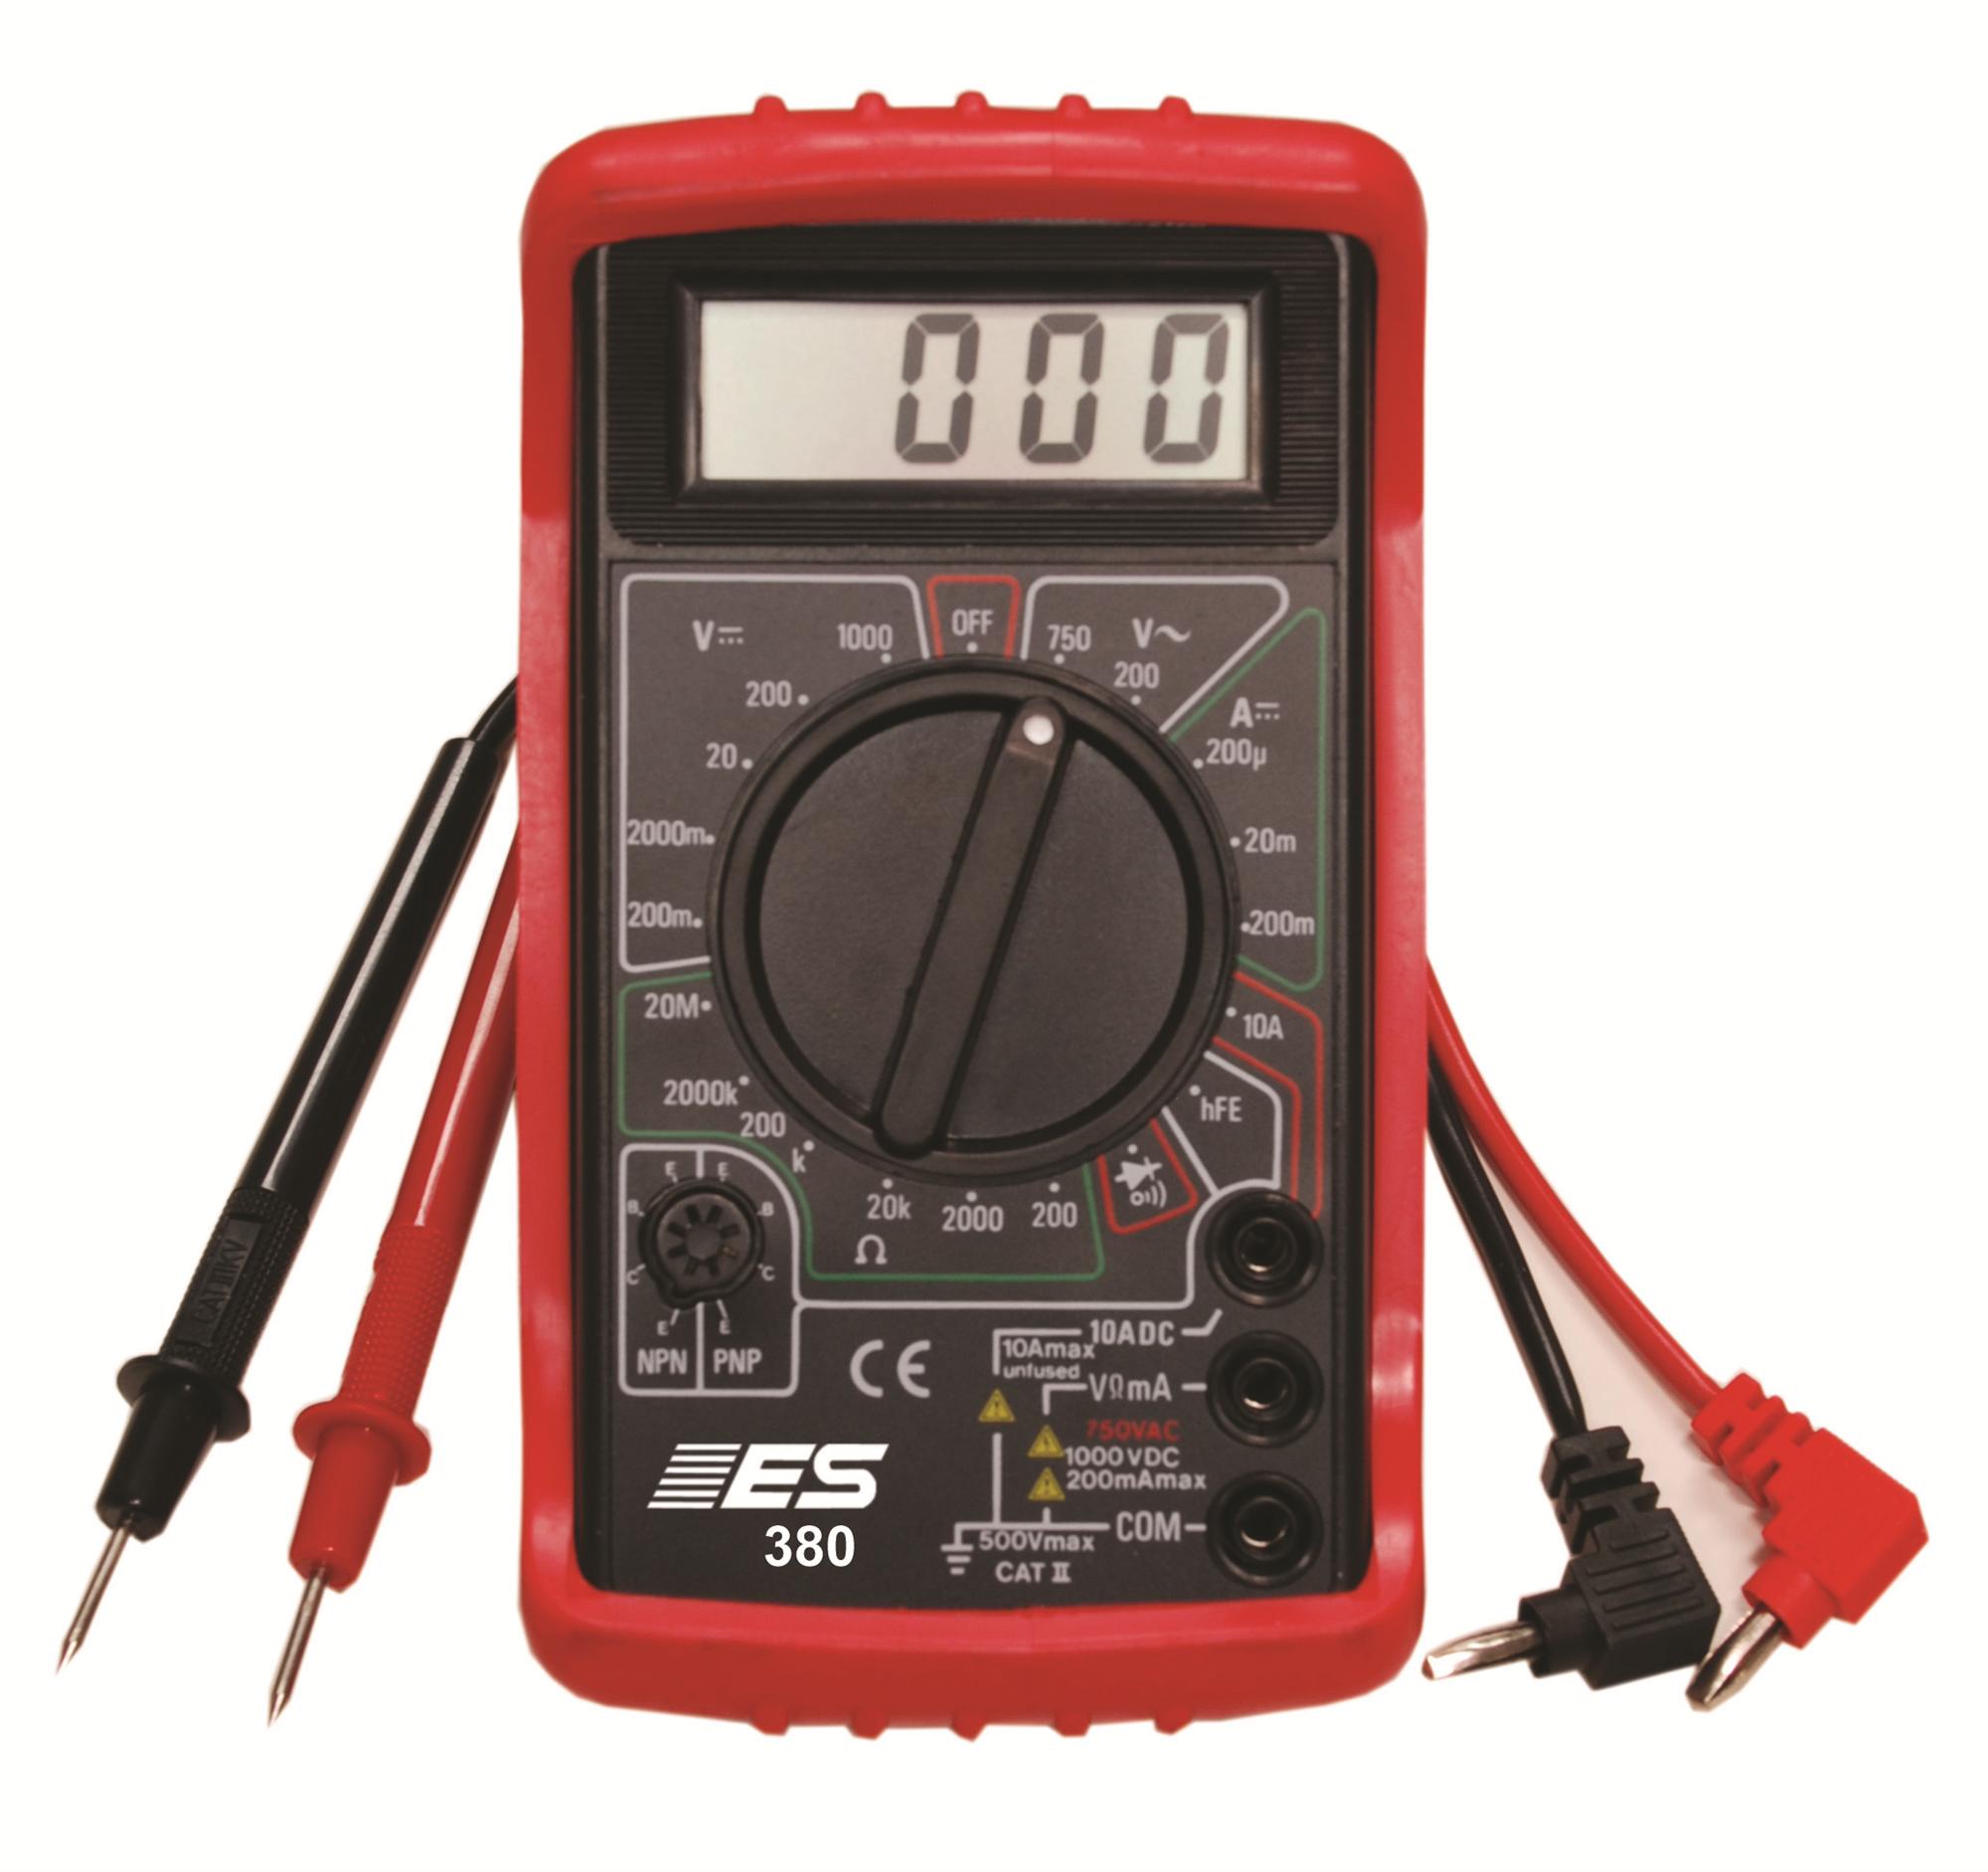 7 Function Compact Digital Multimeter With Holster #380